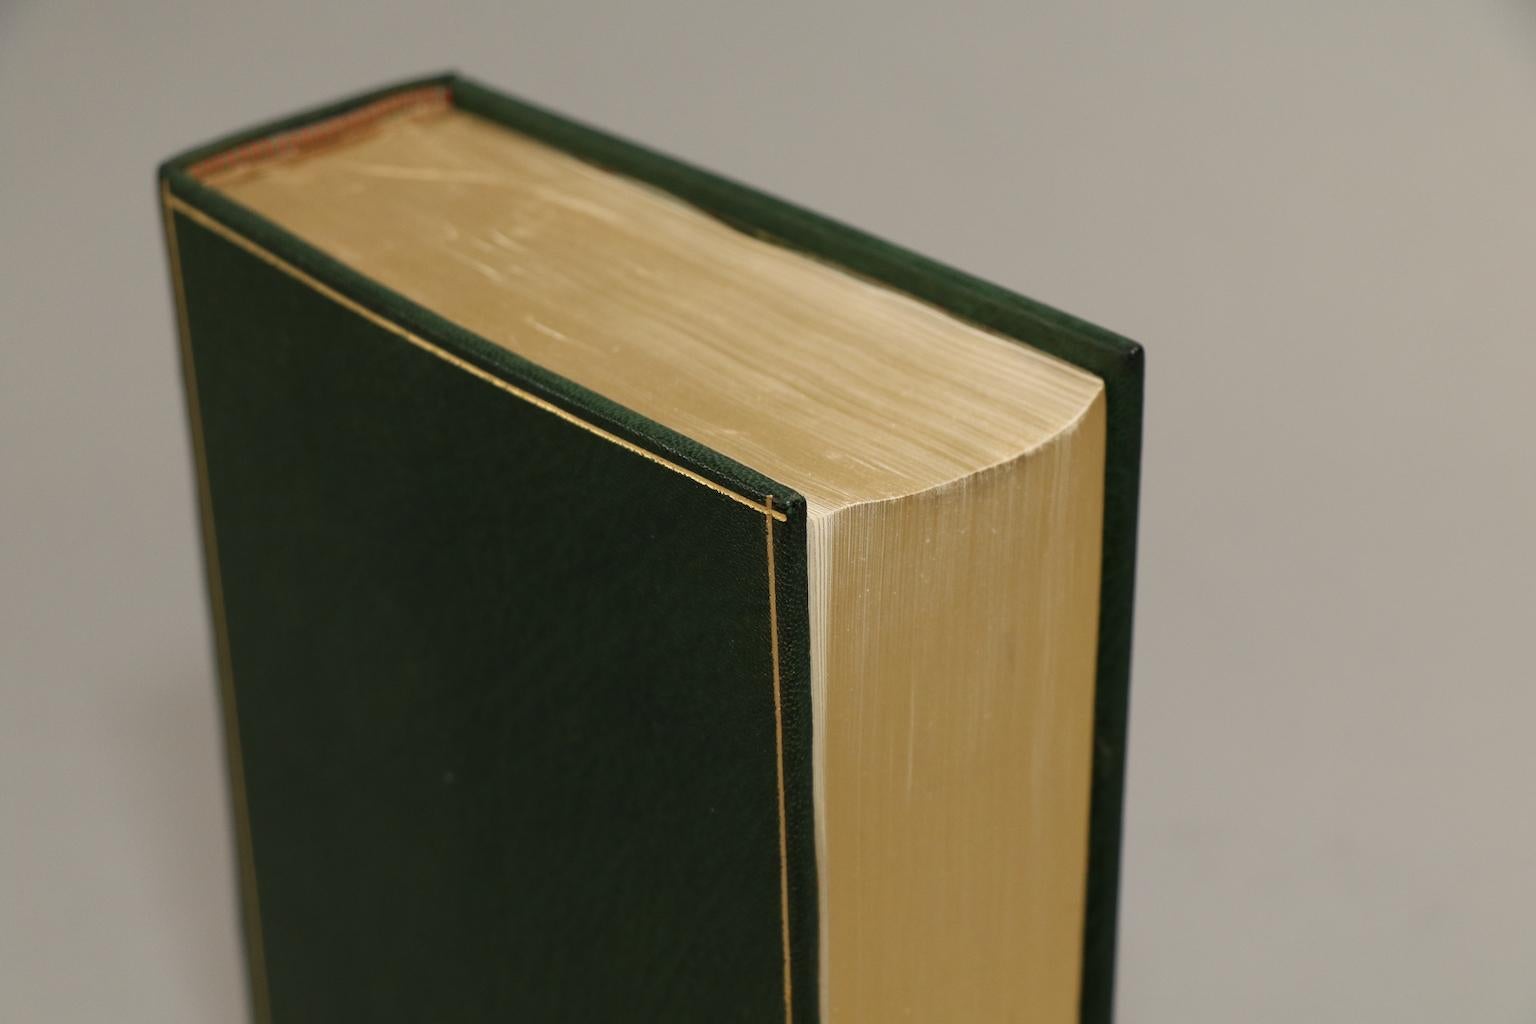 1 volume. First edition! Rebound in full green Morocco with all edges gilt, raised bands, and gilt panels. Original covers bound in the rear. Published in New York by Random House in 1957.